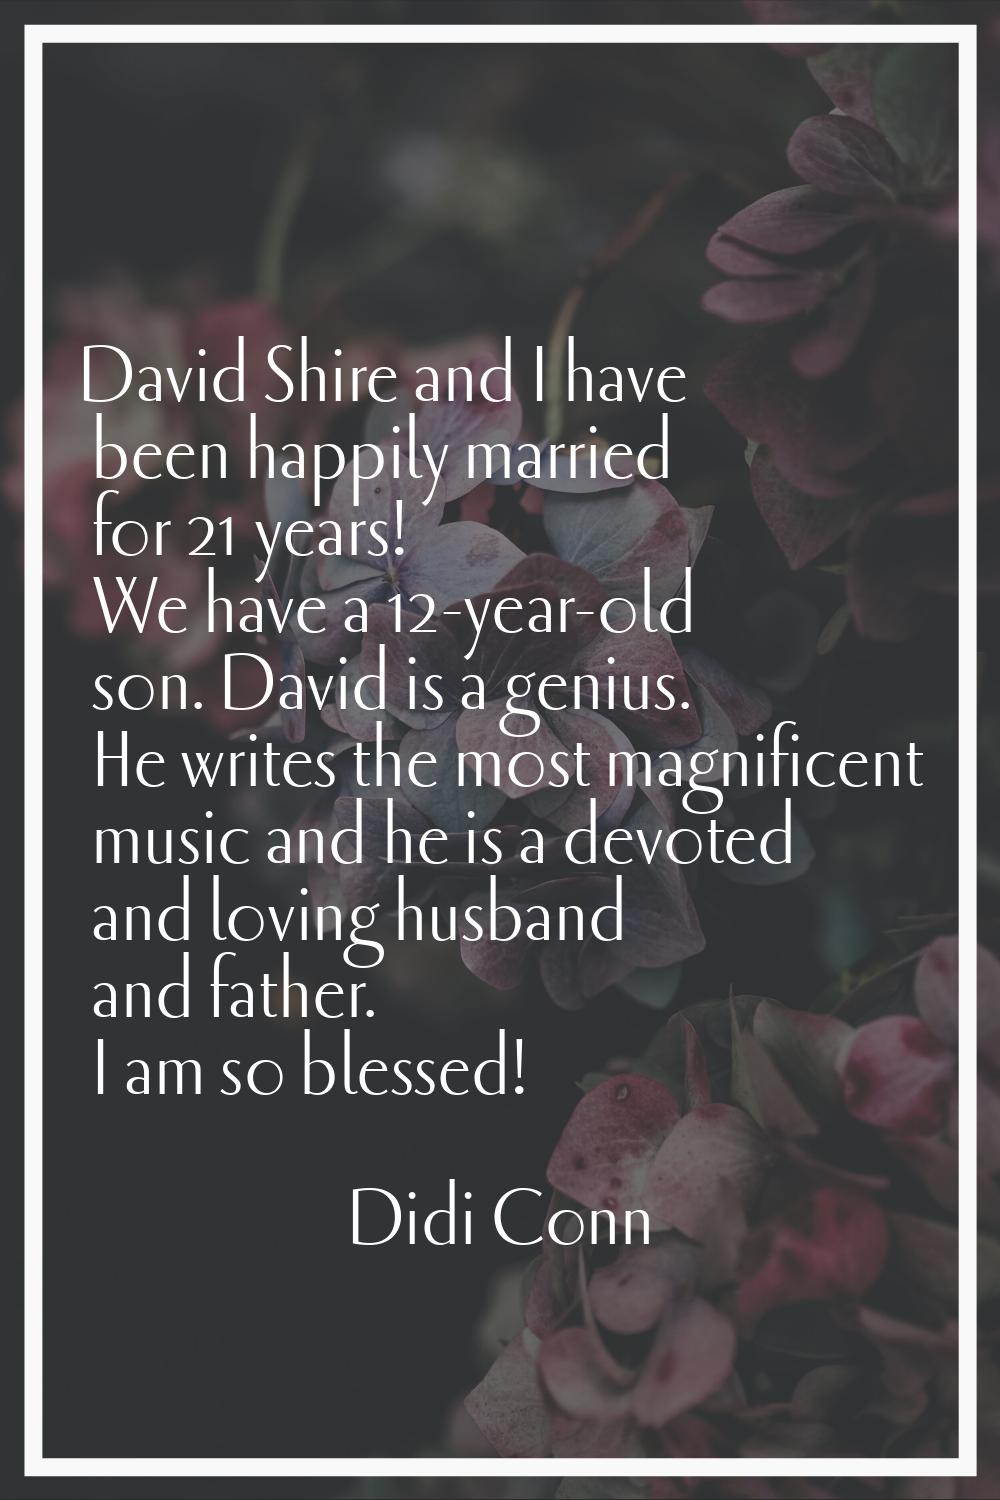 David Shire and I have been happily married for 21 years! We have a 12-year-old son. David is a gen